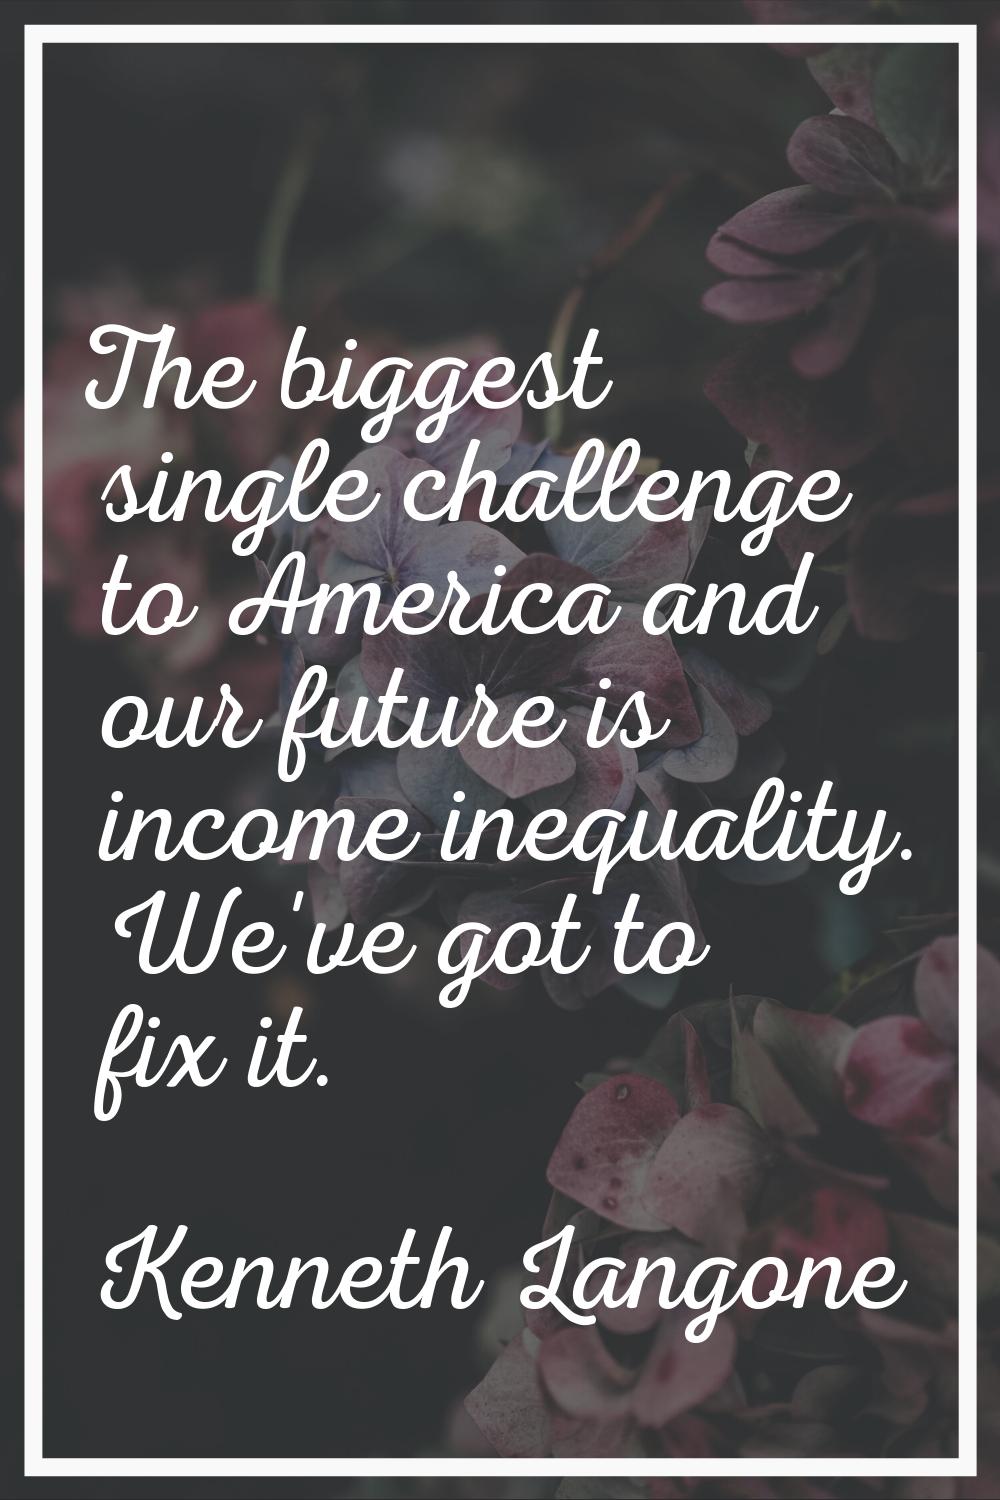 The biggest single challenge to America and our future is income inequality. We've got to fix it.